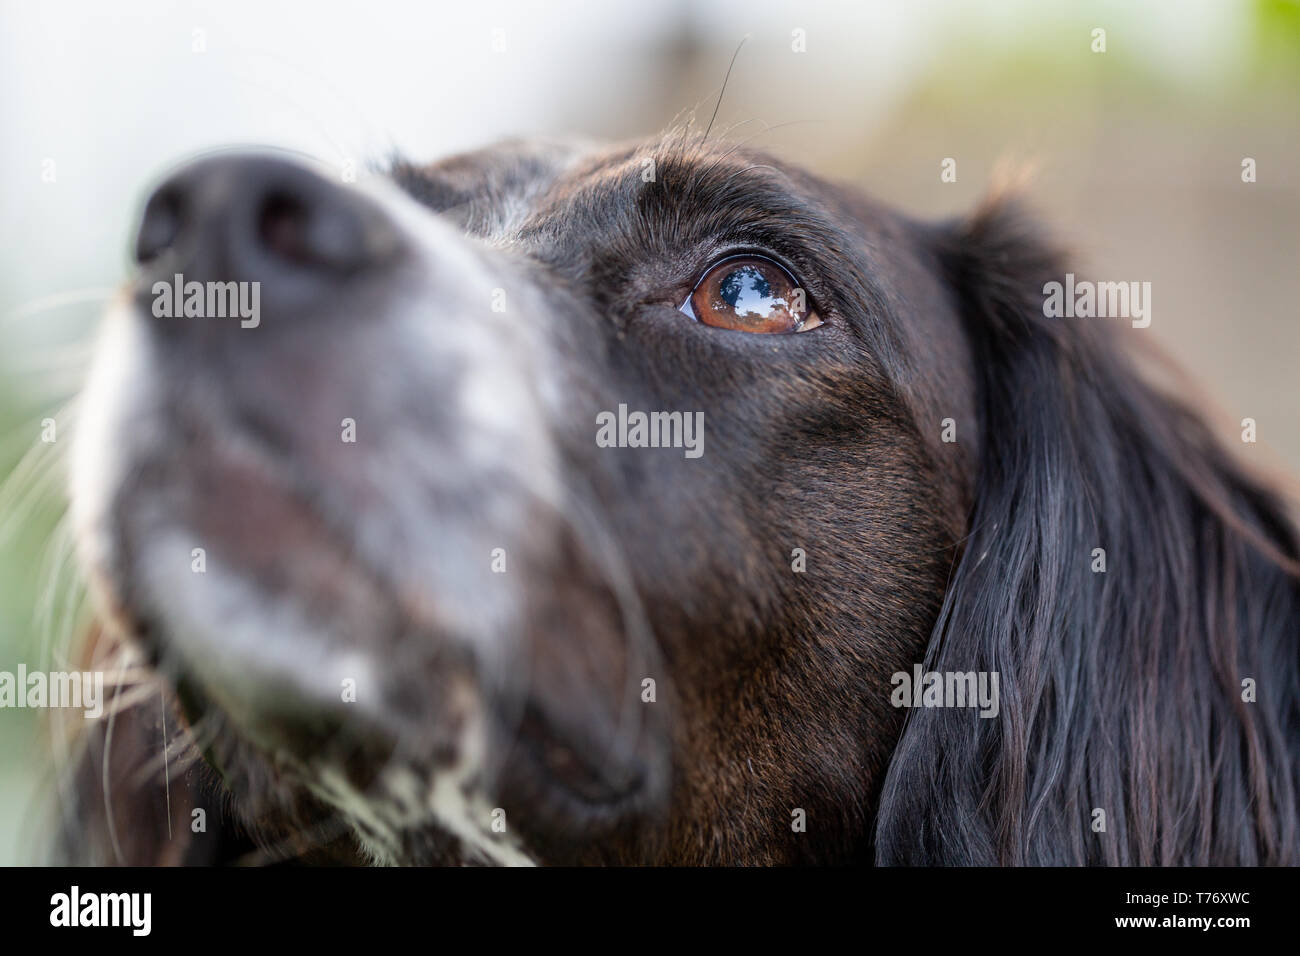 Close up portrait of a black and white brittany spaniel looking up with a shallow depth of field and focus on one eye. Stock Photo